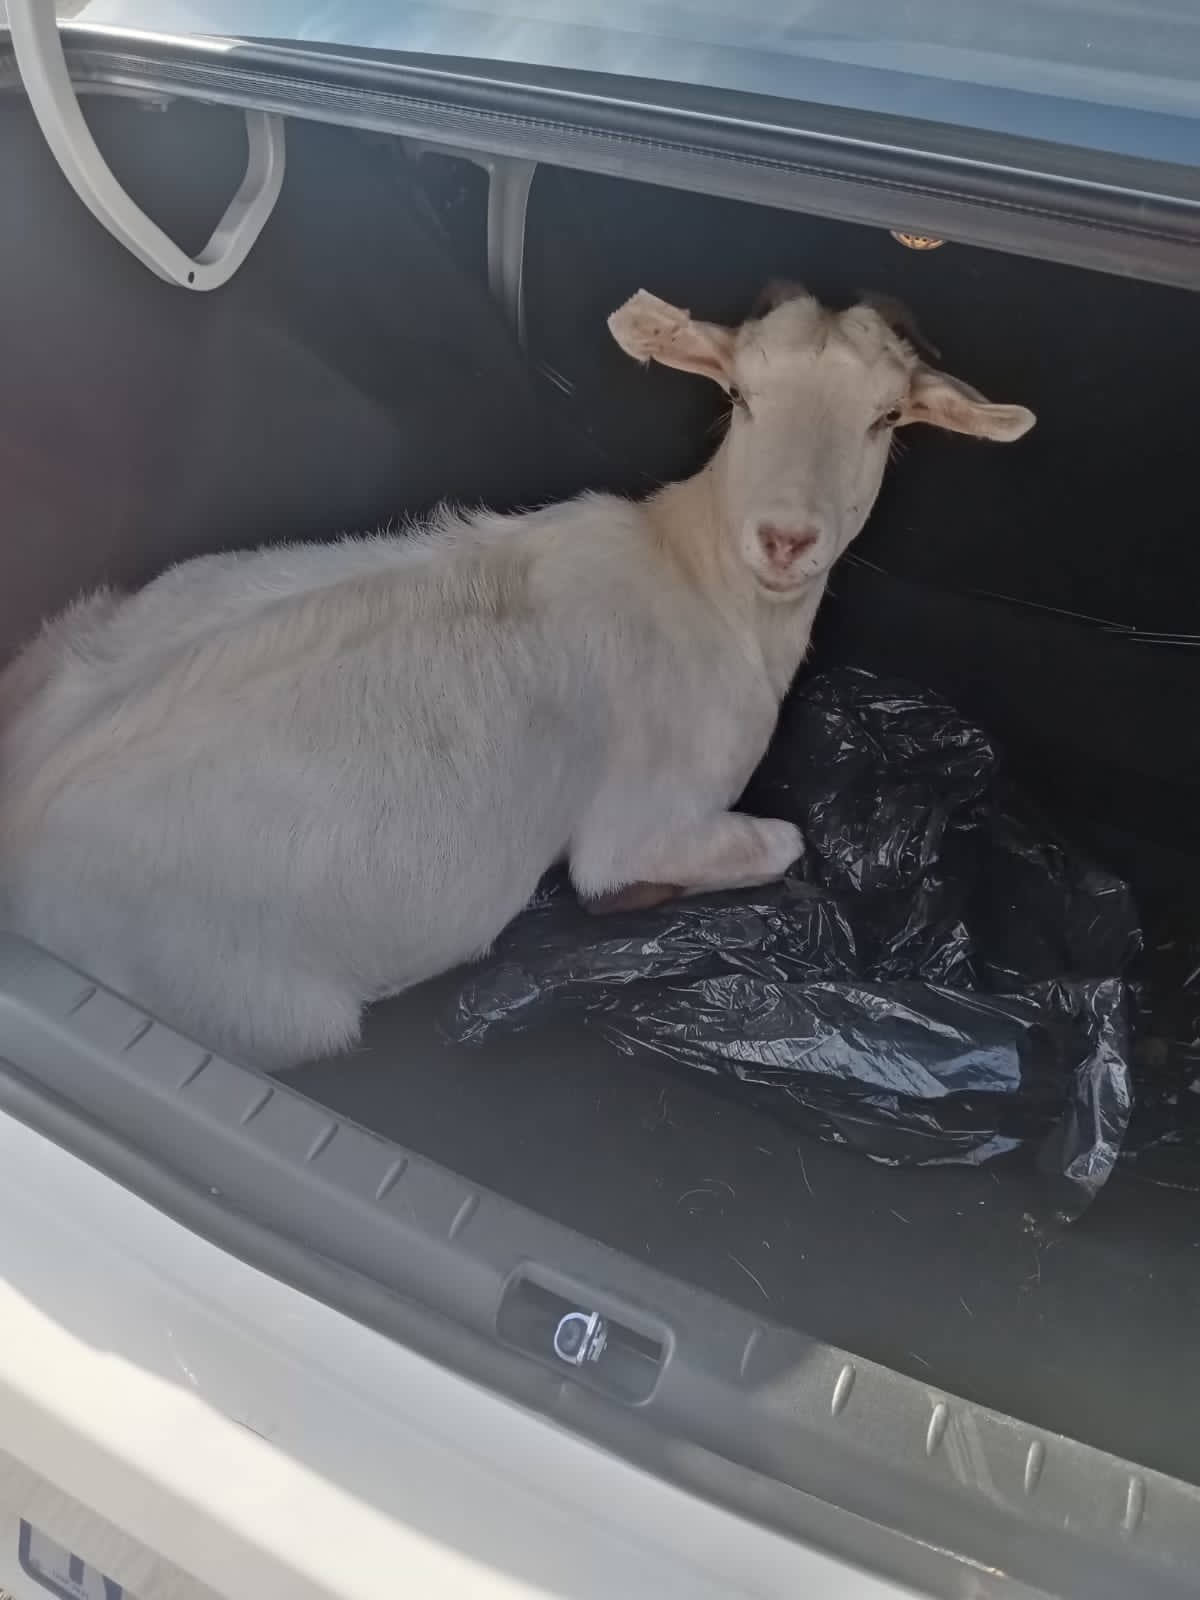 Three suspects aged between 23 and 31 were placed under arrest for stock theft - KwaZulu-Natal